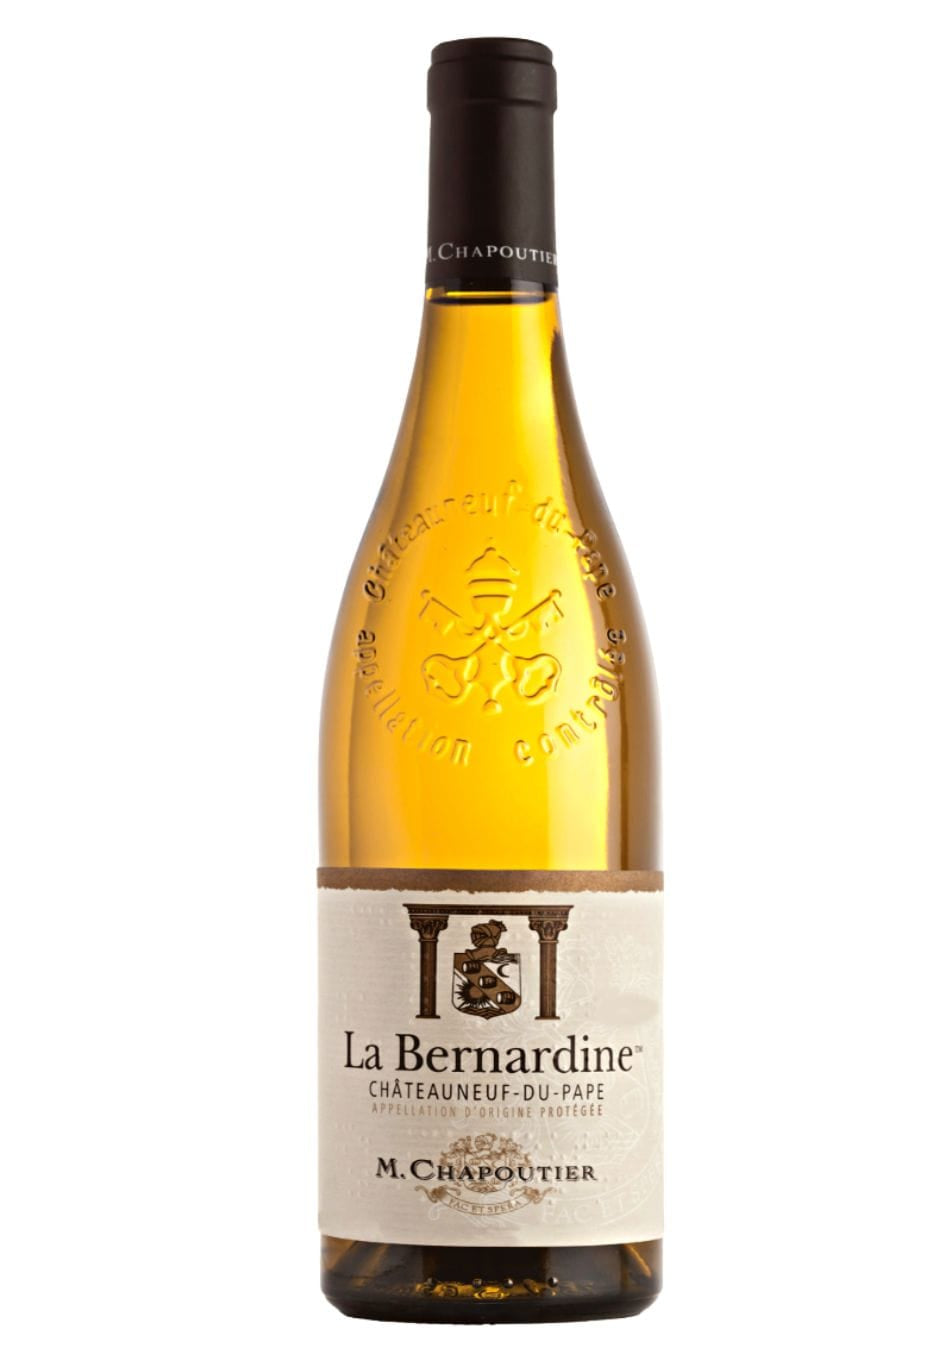 Shop Maison M. Chapoutier Maison M. Chapoutier Chateauneuf-du-Pape La Bernardine Blanc 2019 online at PENTICTON artisanal French wine store in Hong Kong. Discover other French wines, promotions, workshops and featured offers at pentictonpacific.com 